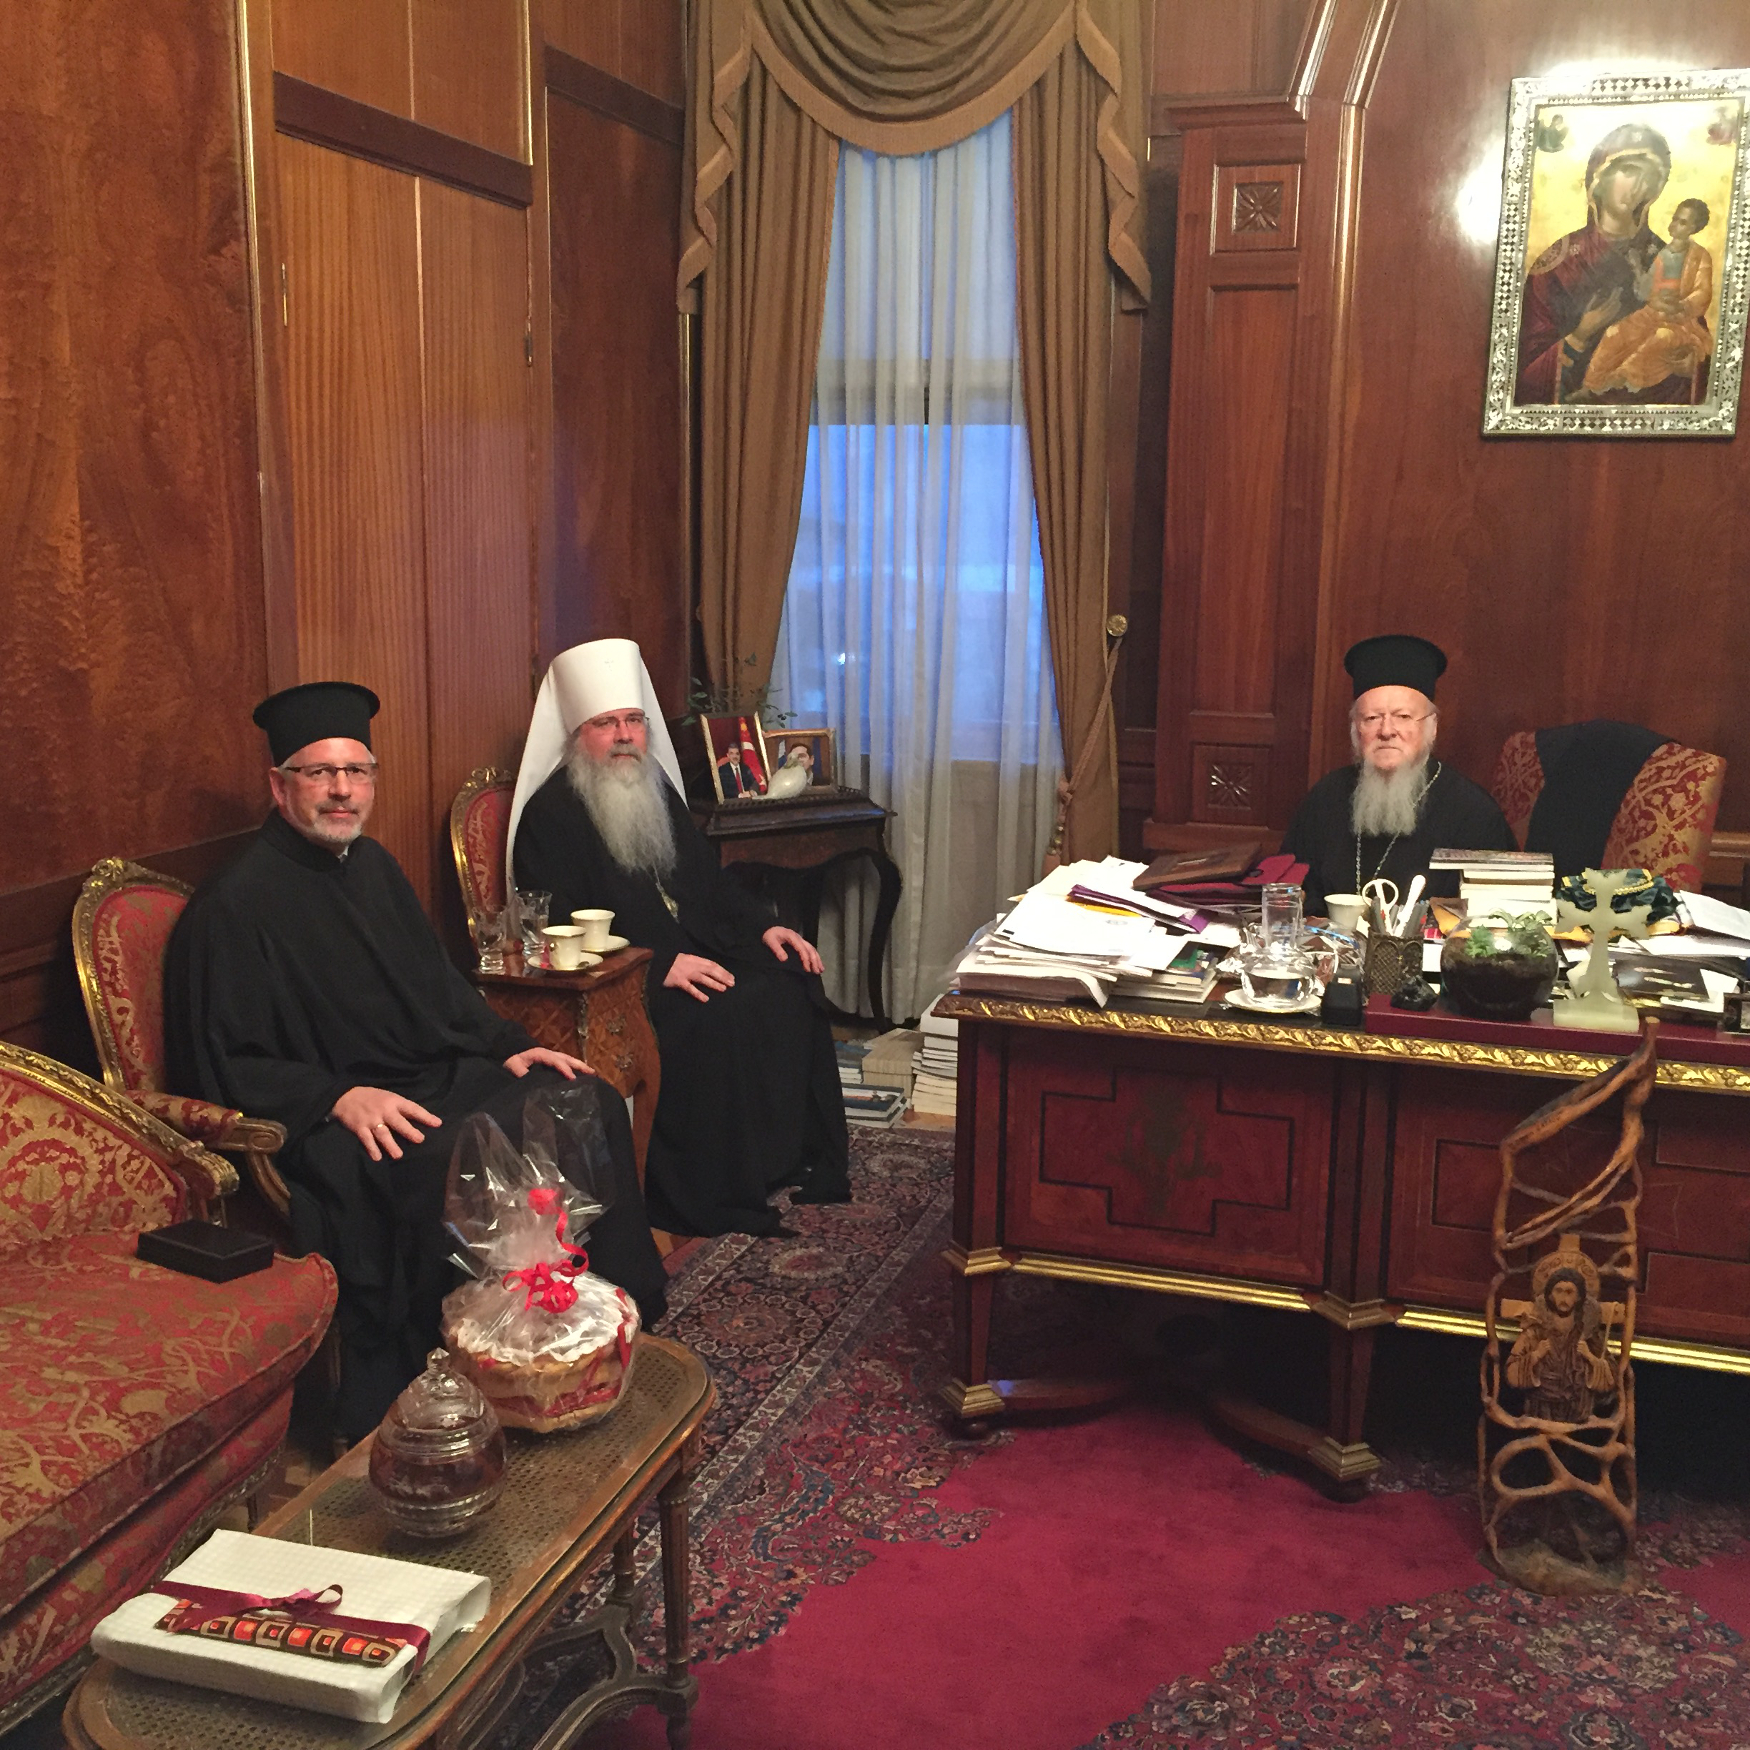 The Sunday of Orthodoxy visit of Metropolitan Tikhon to the Ecumenical Patriarchate